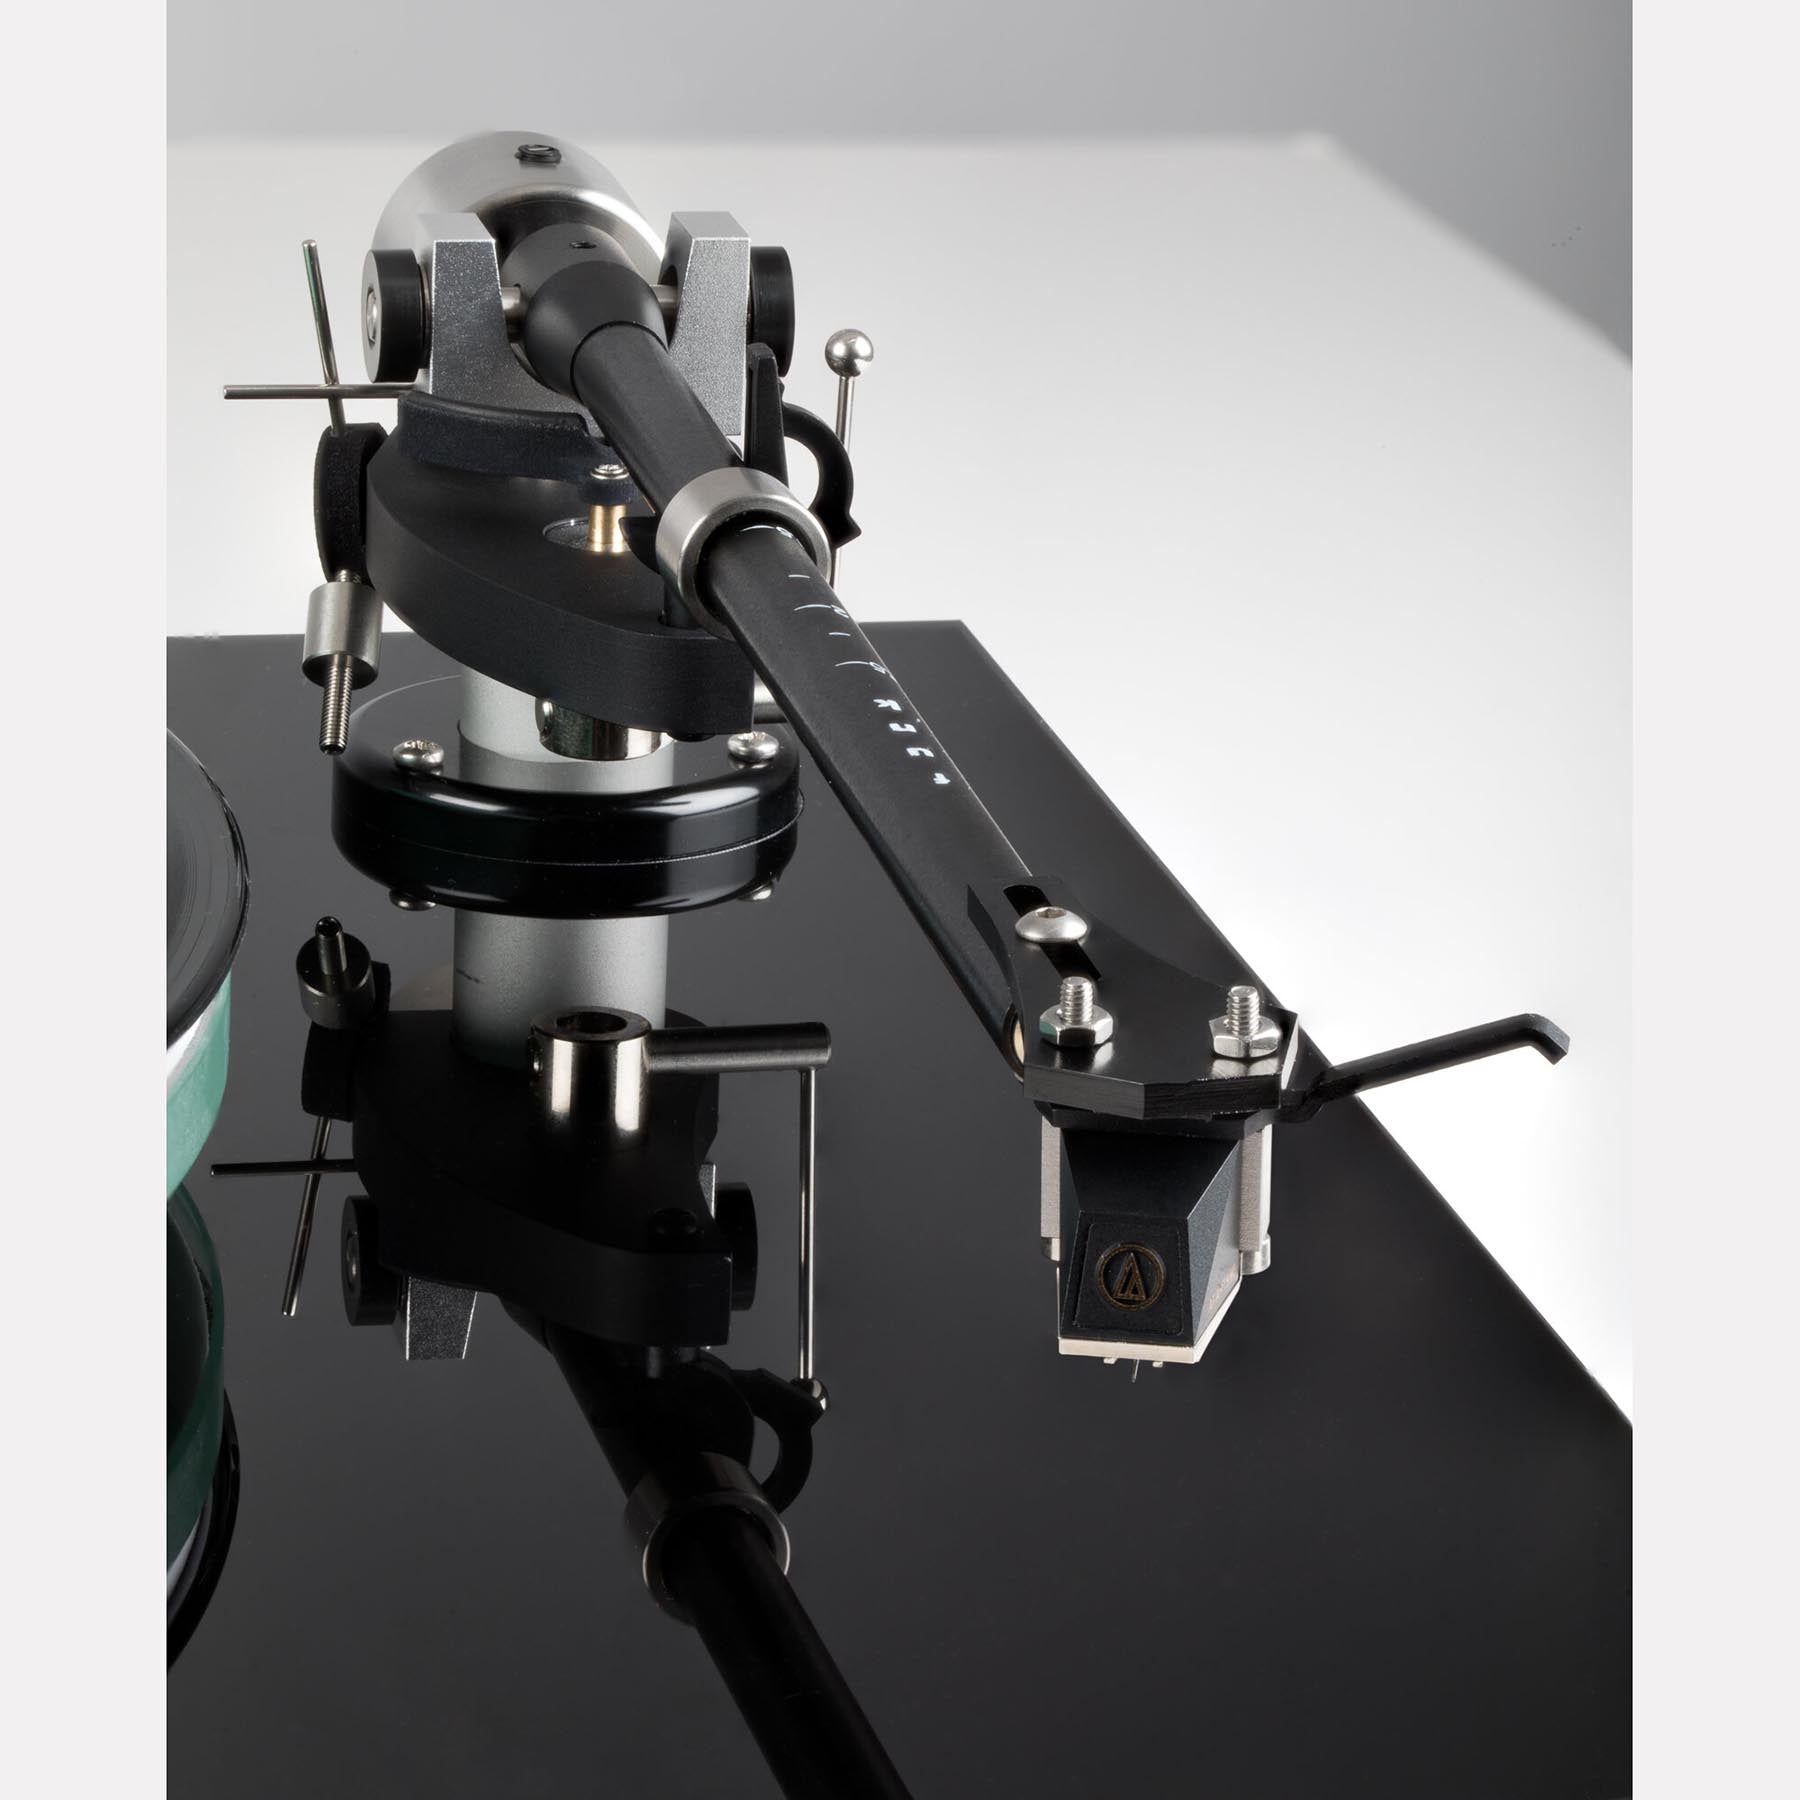 The Funk Firm Little Super Deck Turntable (Black) with Fx5-x Tonearm and 5mm Mat